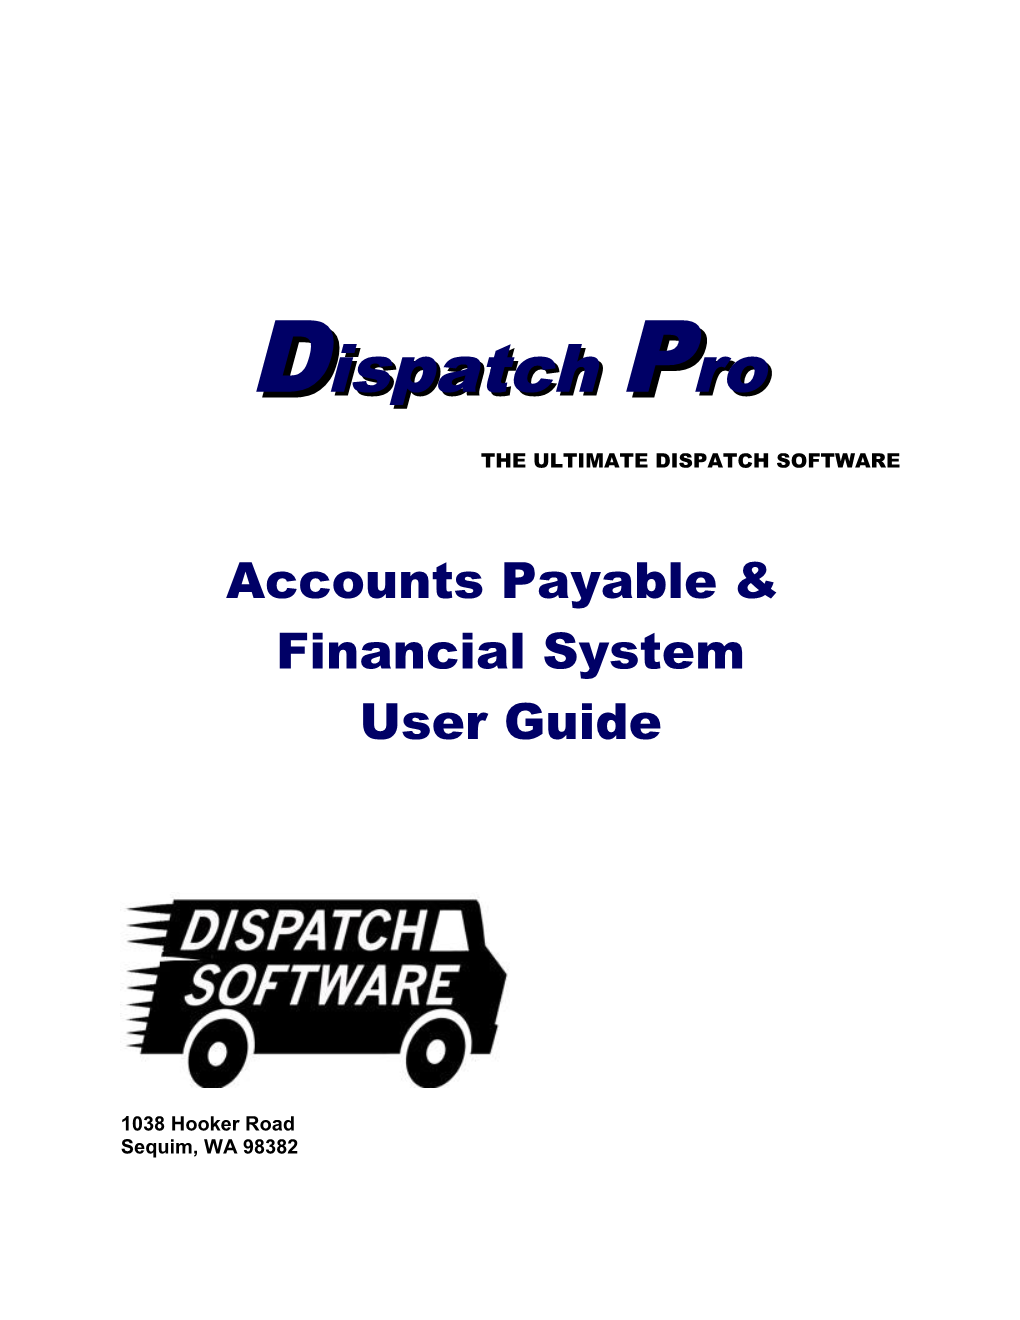 The Ultimate Dispatch Software